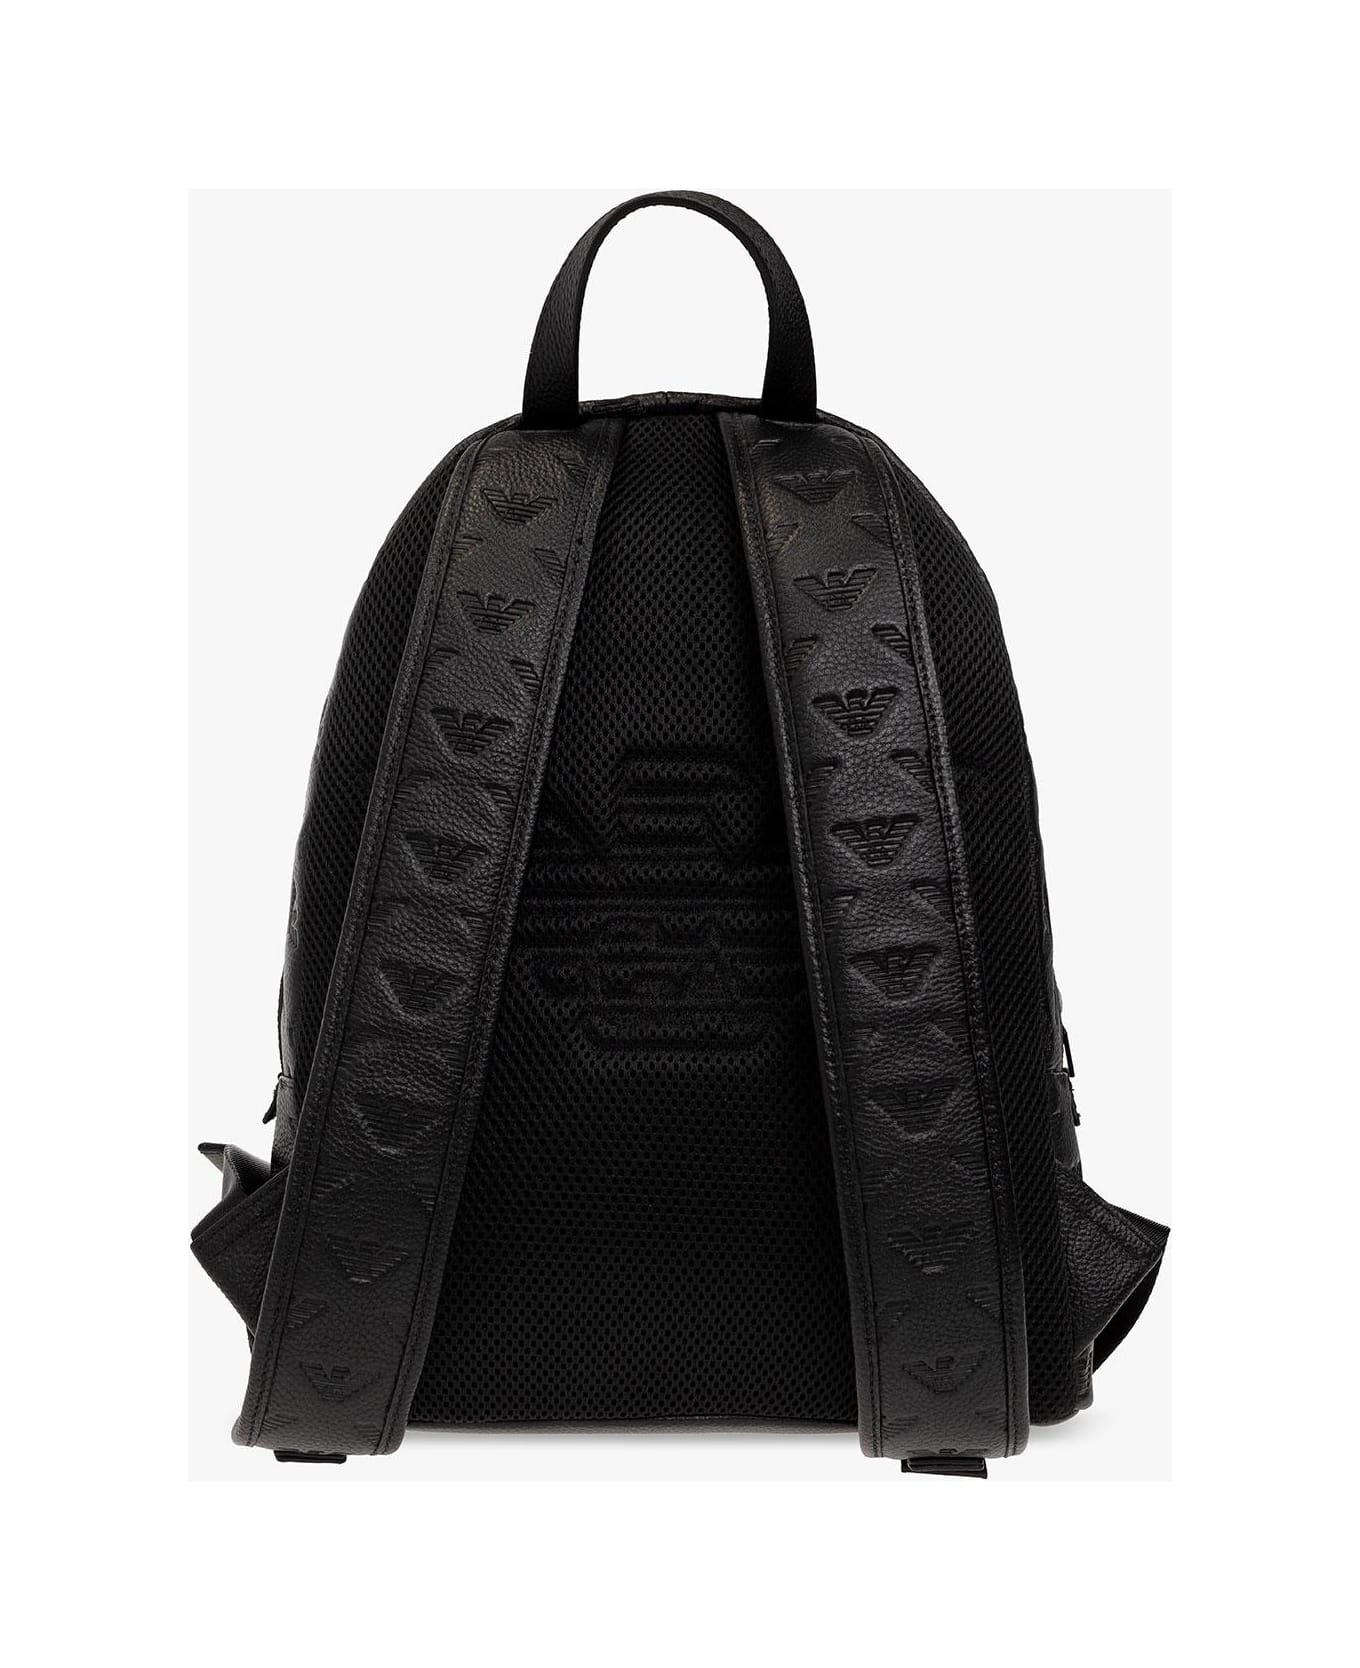 Emporio Armani Embossed Leather Backpack - Black バックパック